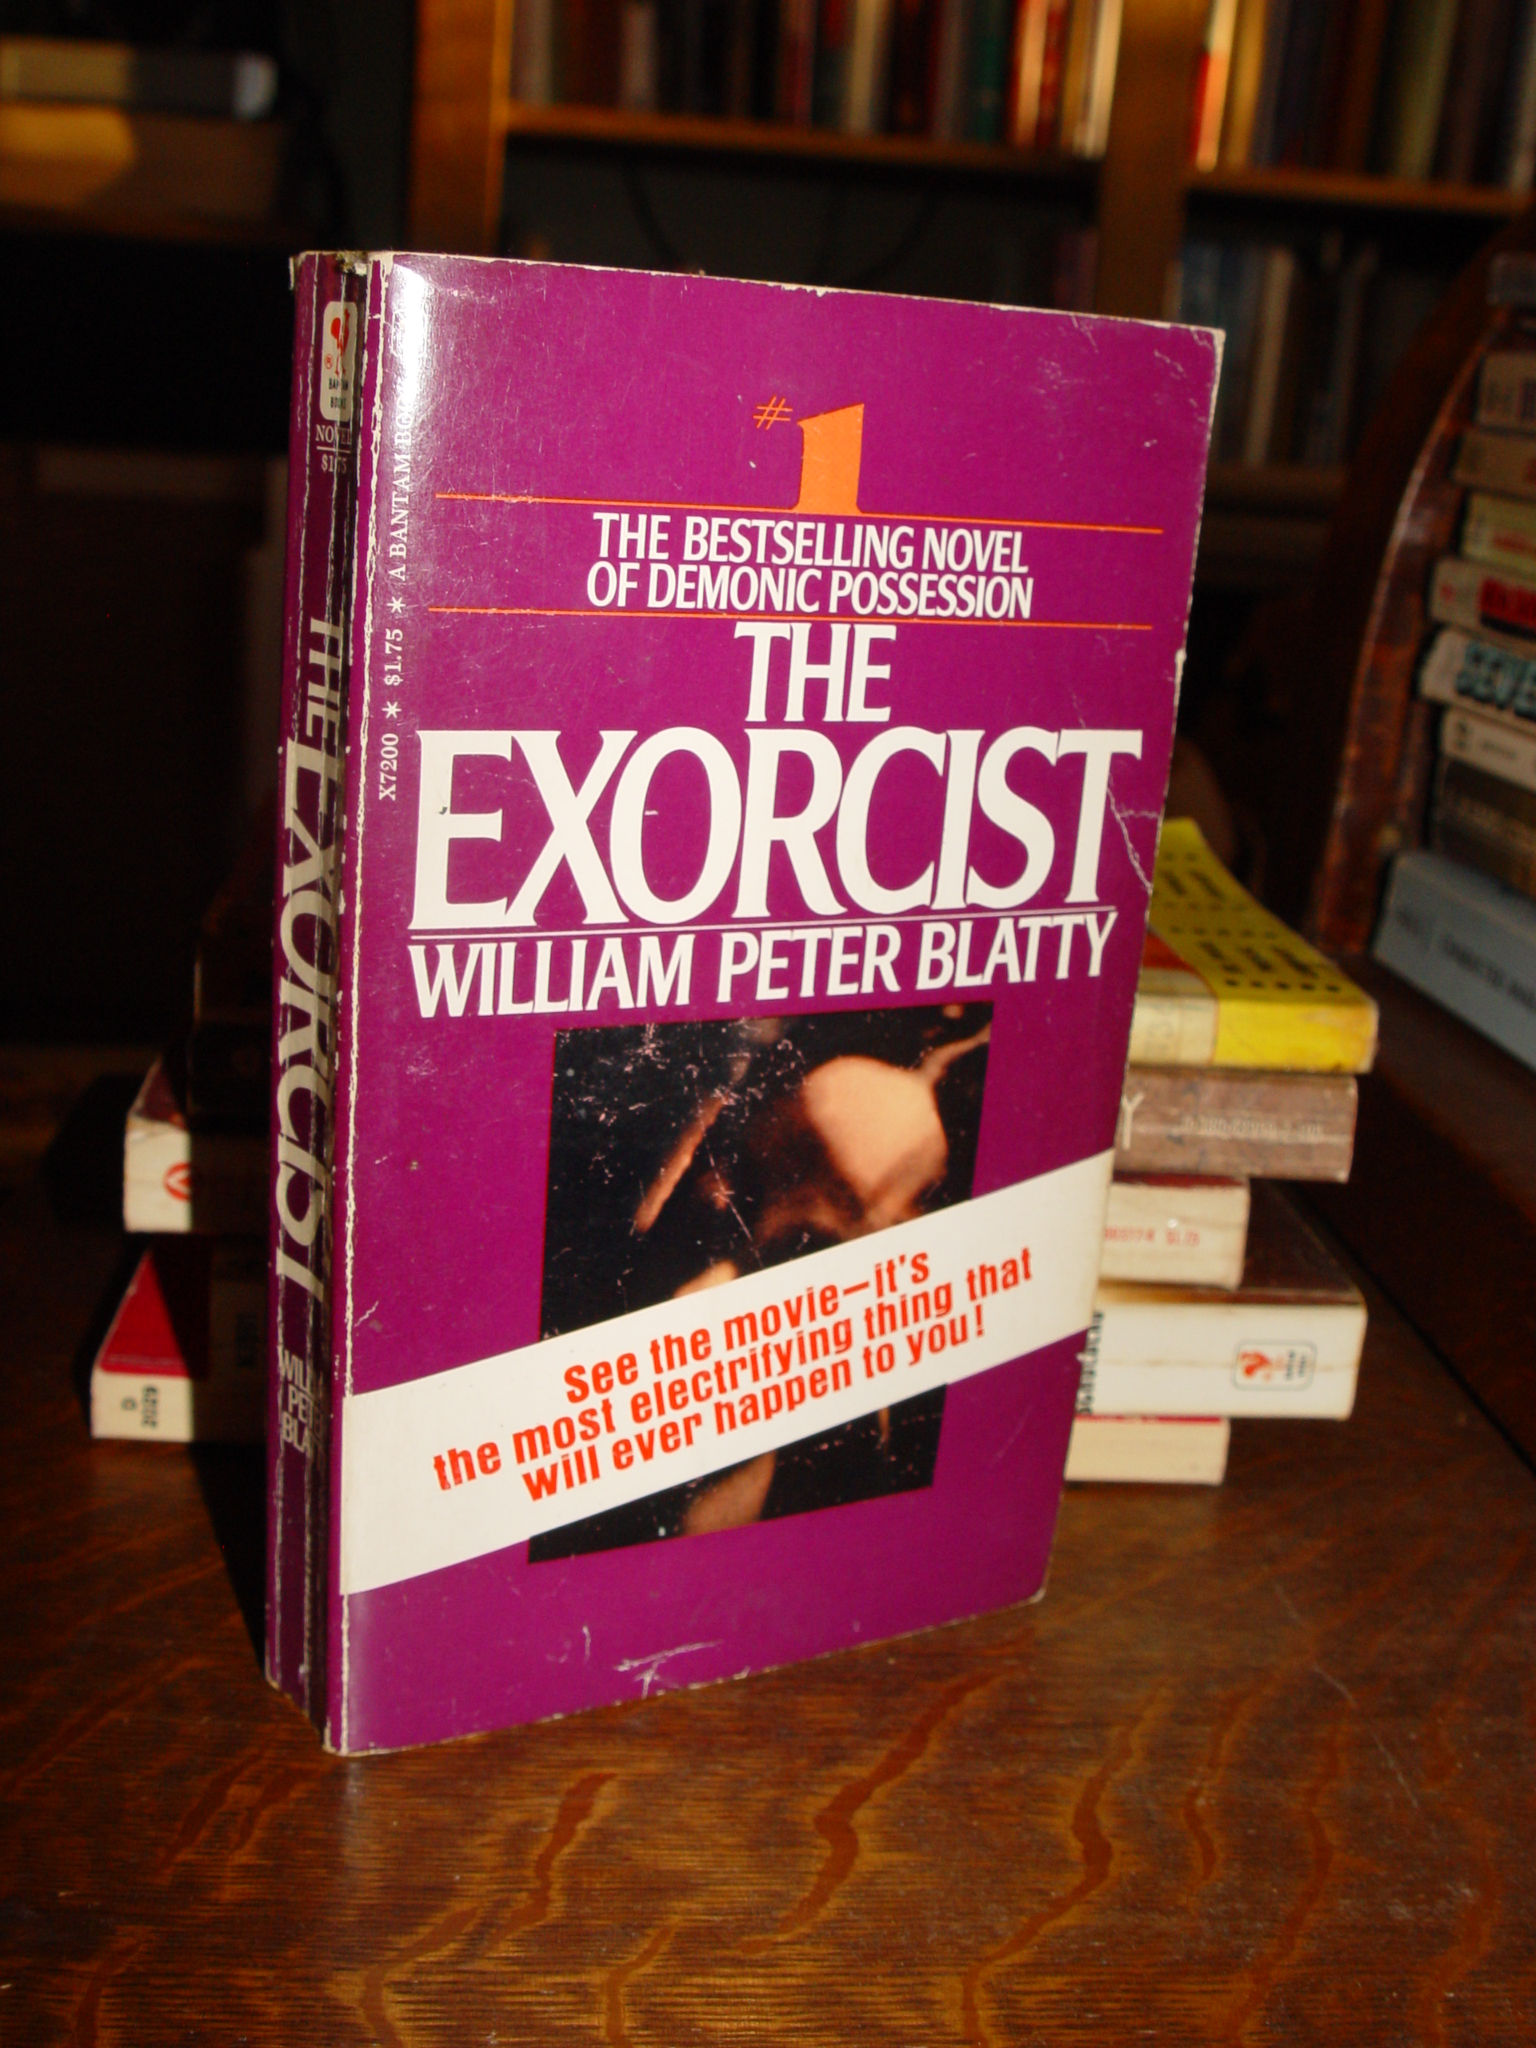 The Exorcist, Paperback 1974 by William
                        Peter Blatty